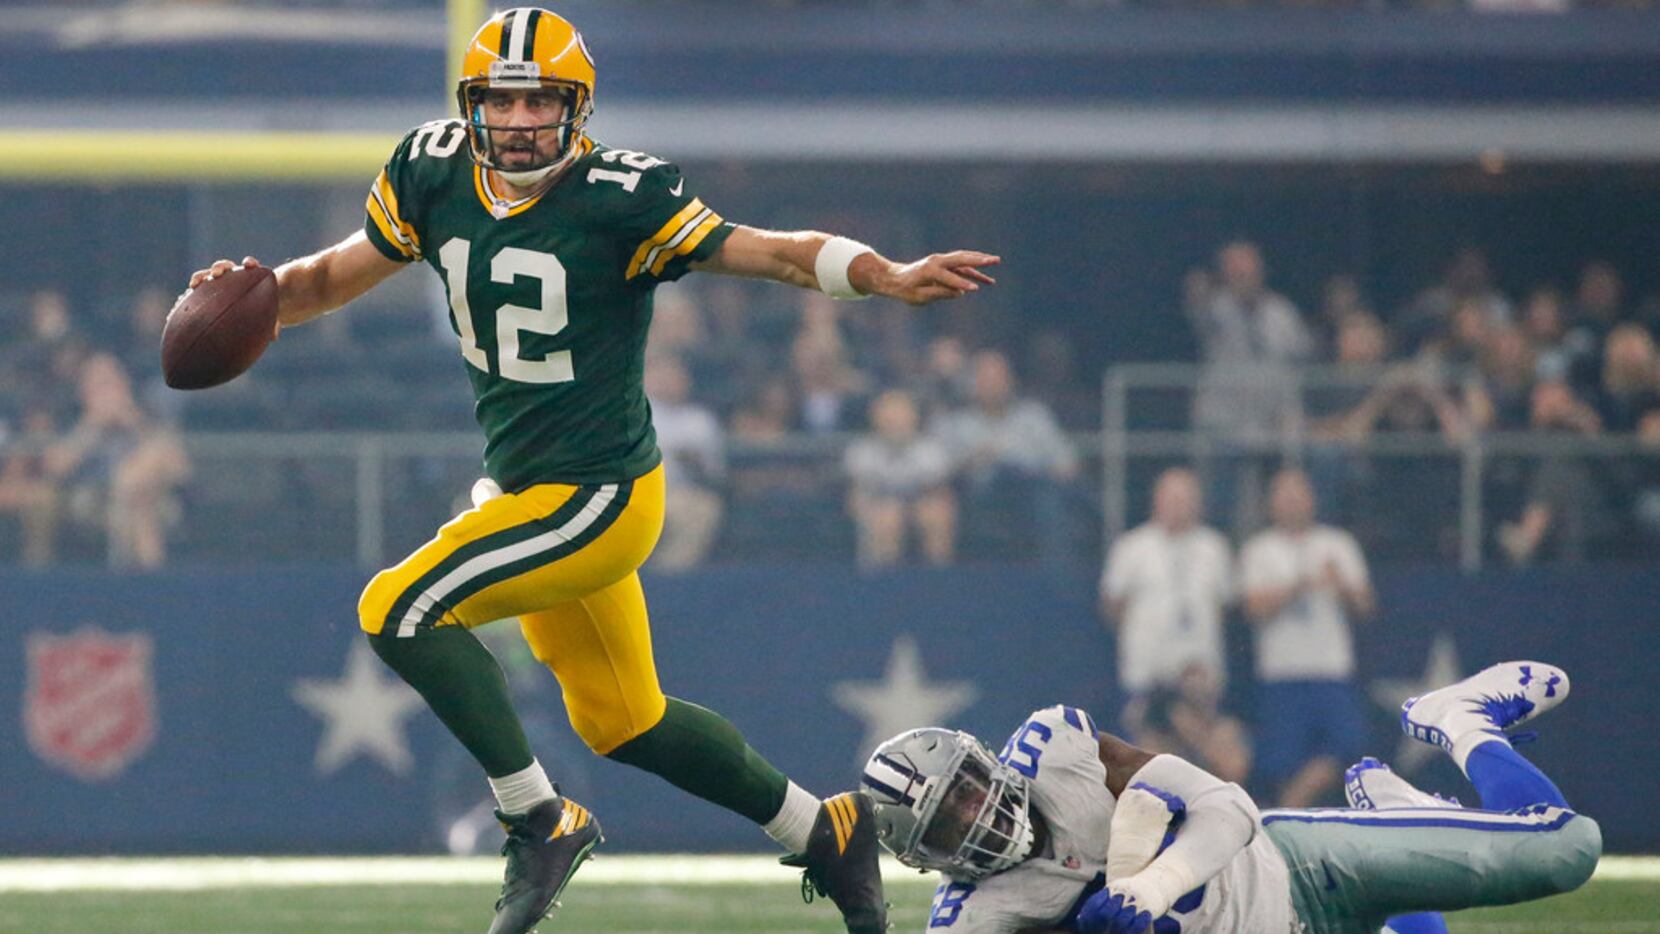 How To Watch Cowboys vs. Packers: Live Stream and Game Predictions